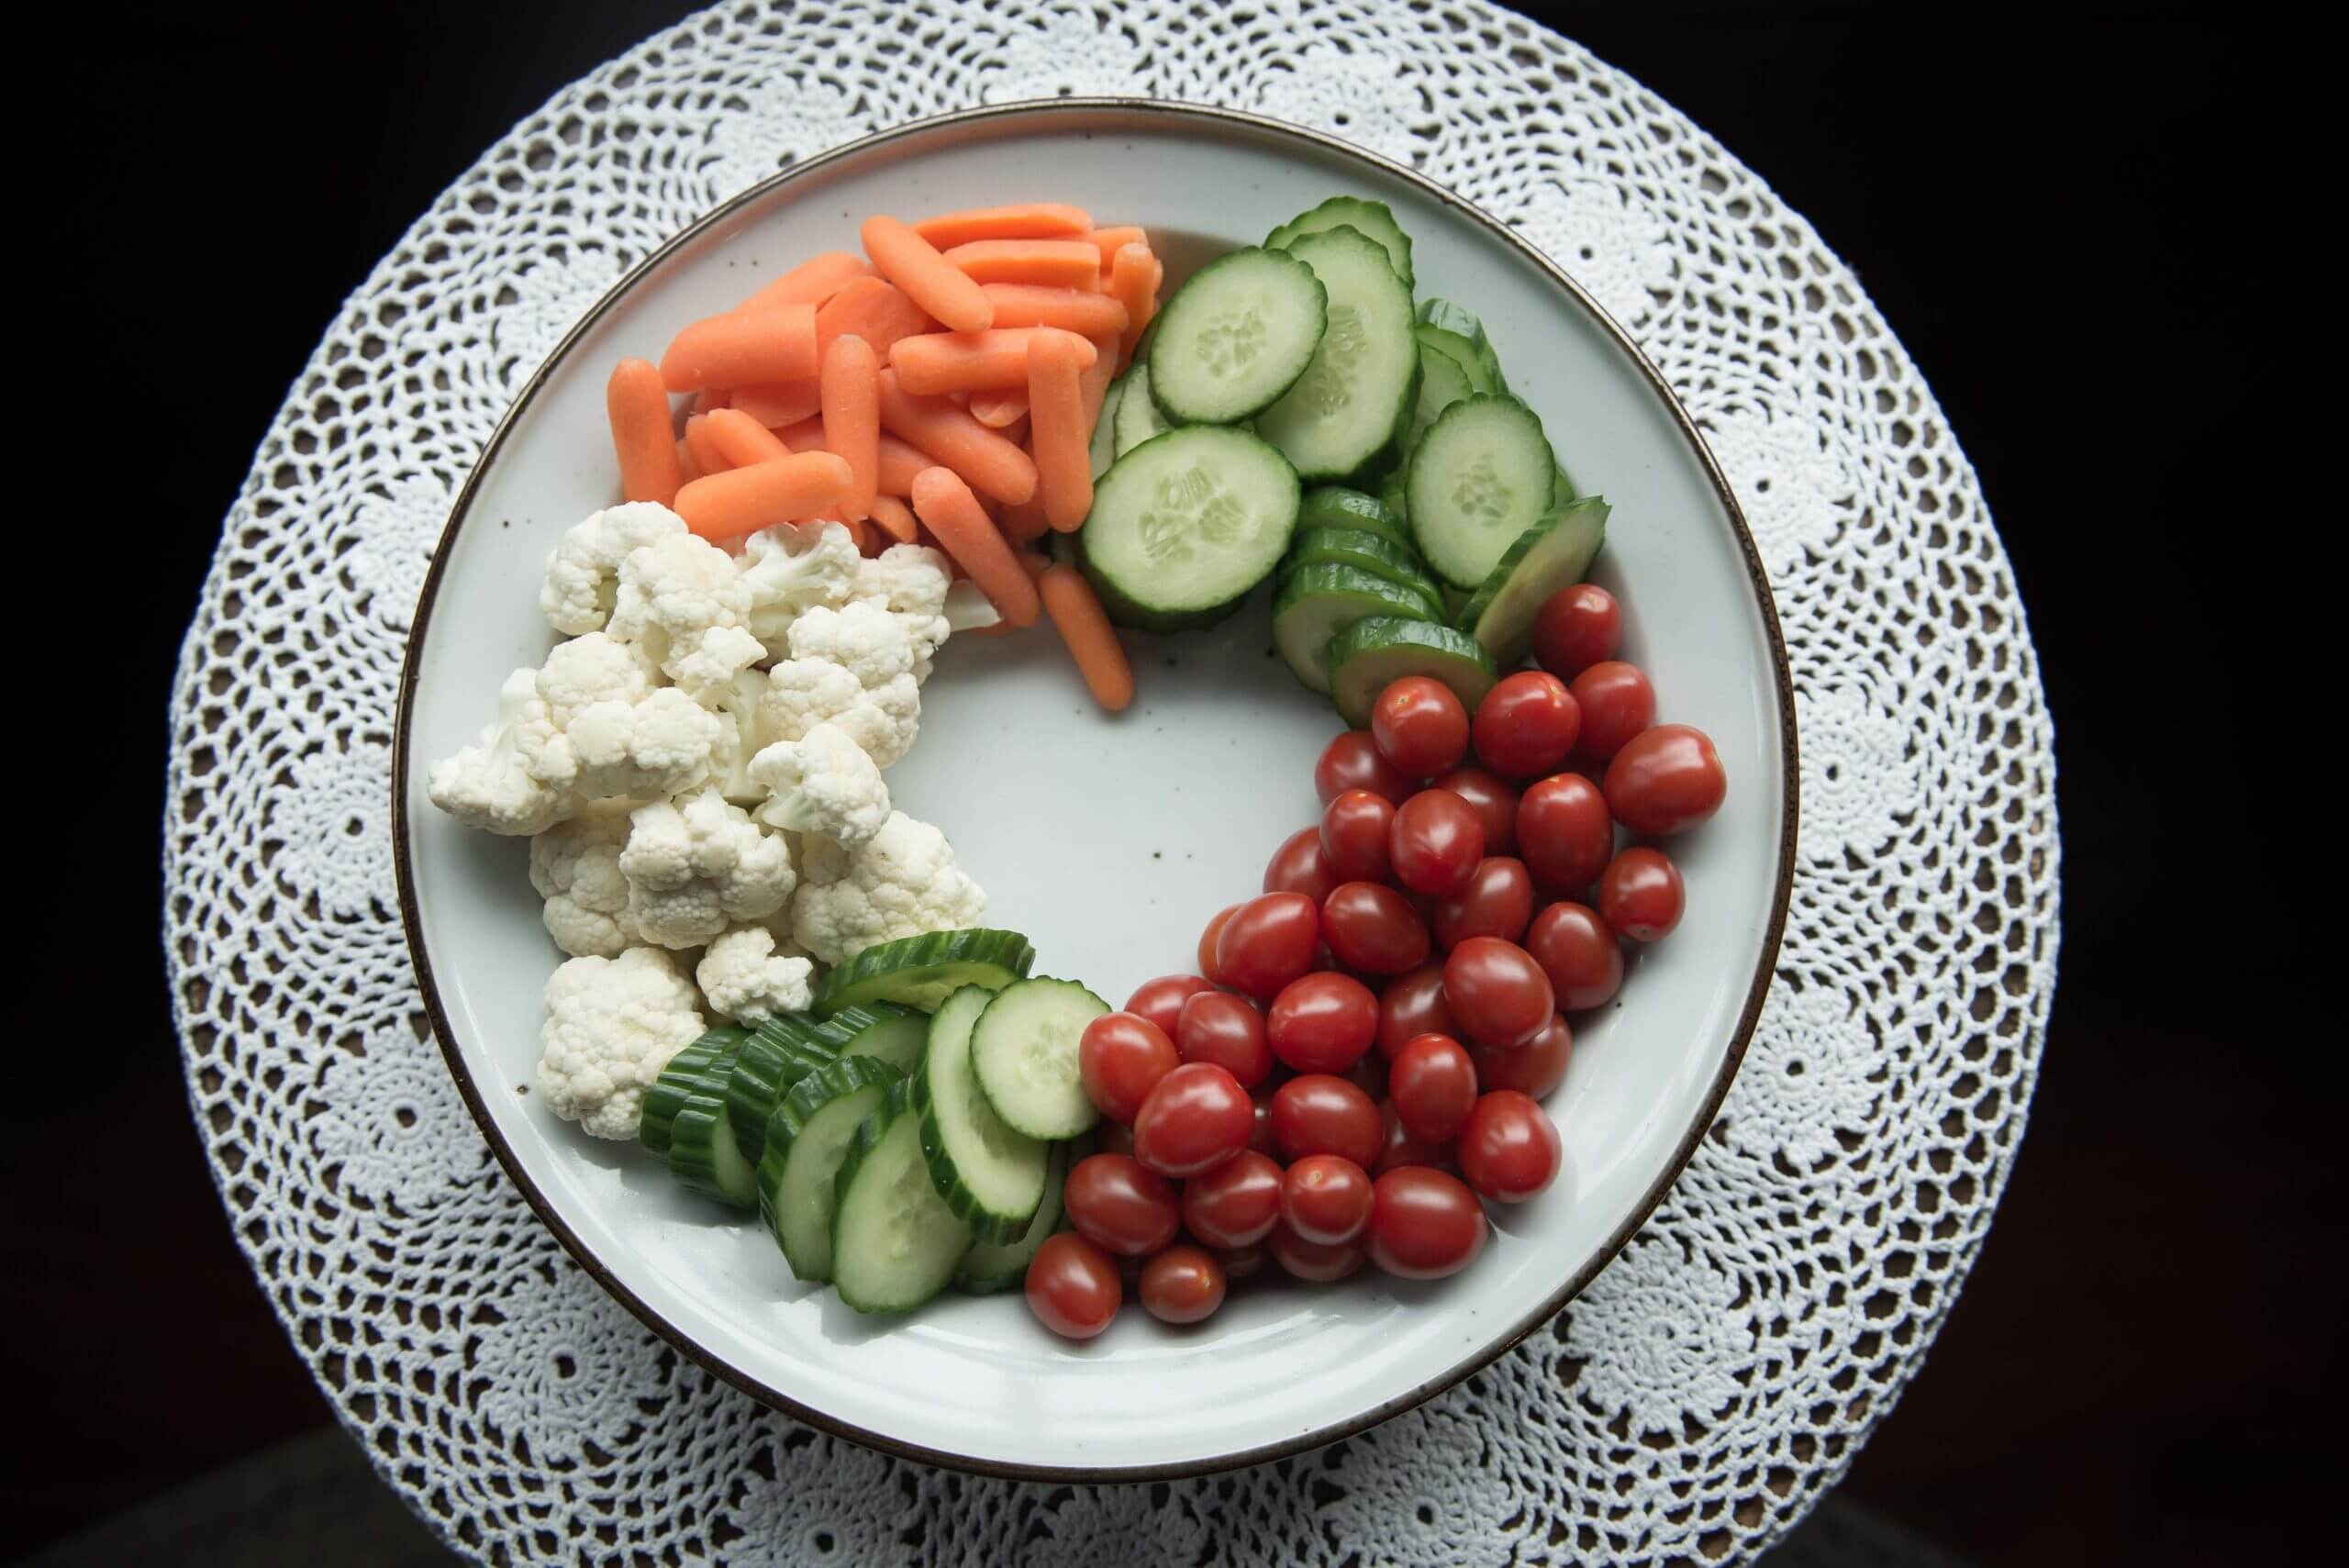 Platter of vegetables with the share of a heart of no vegetables in the middle.